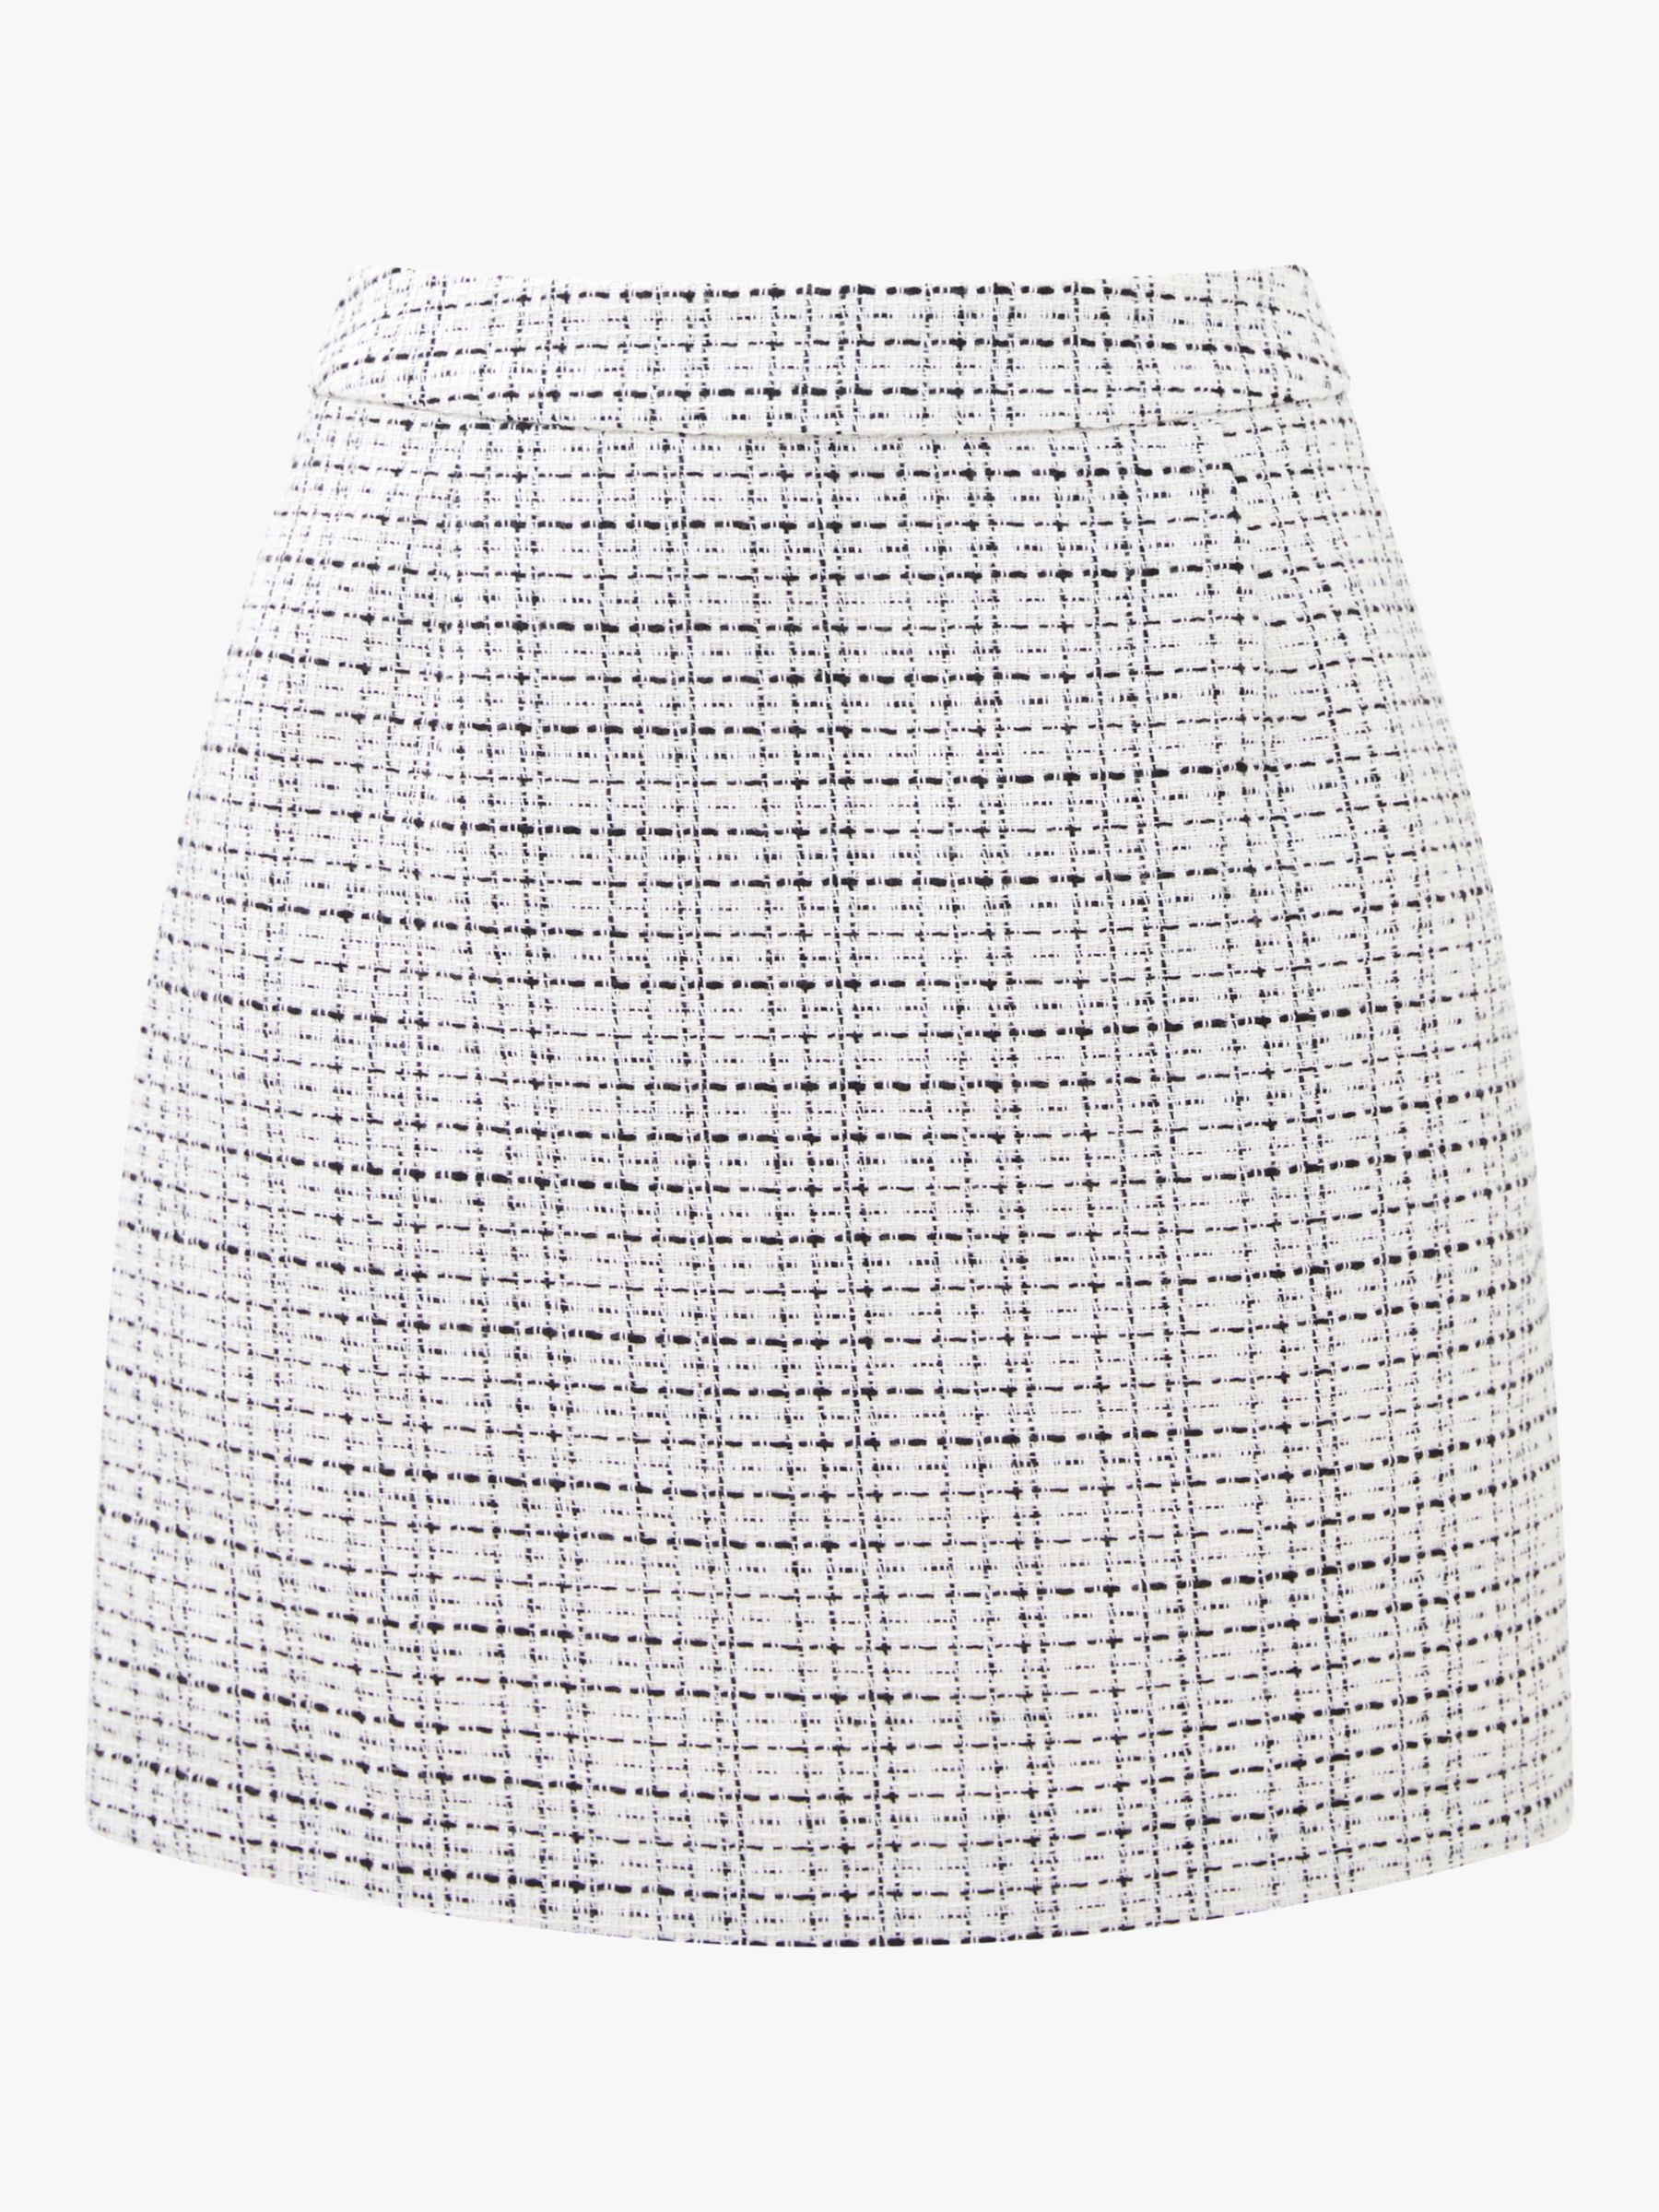 Buy French Connection Effie Boucle Mini Skirt, Cream/Black Online at johnlewis.com